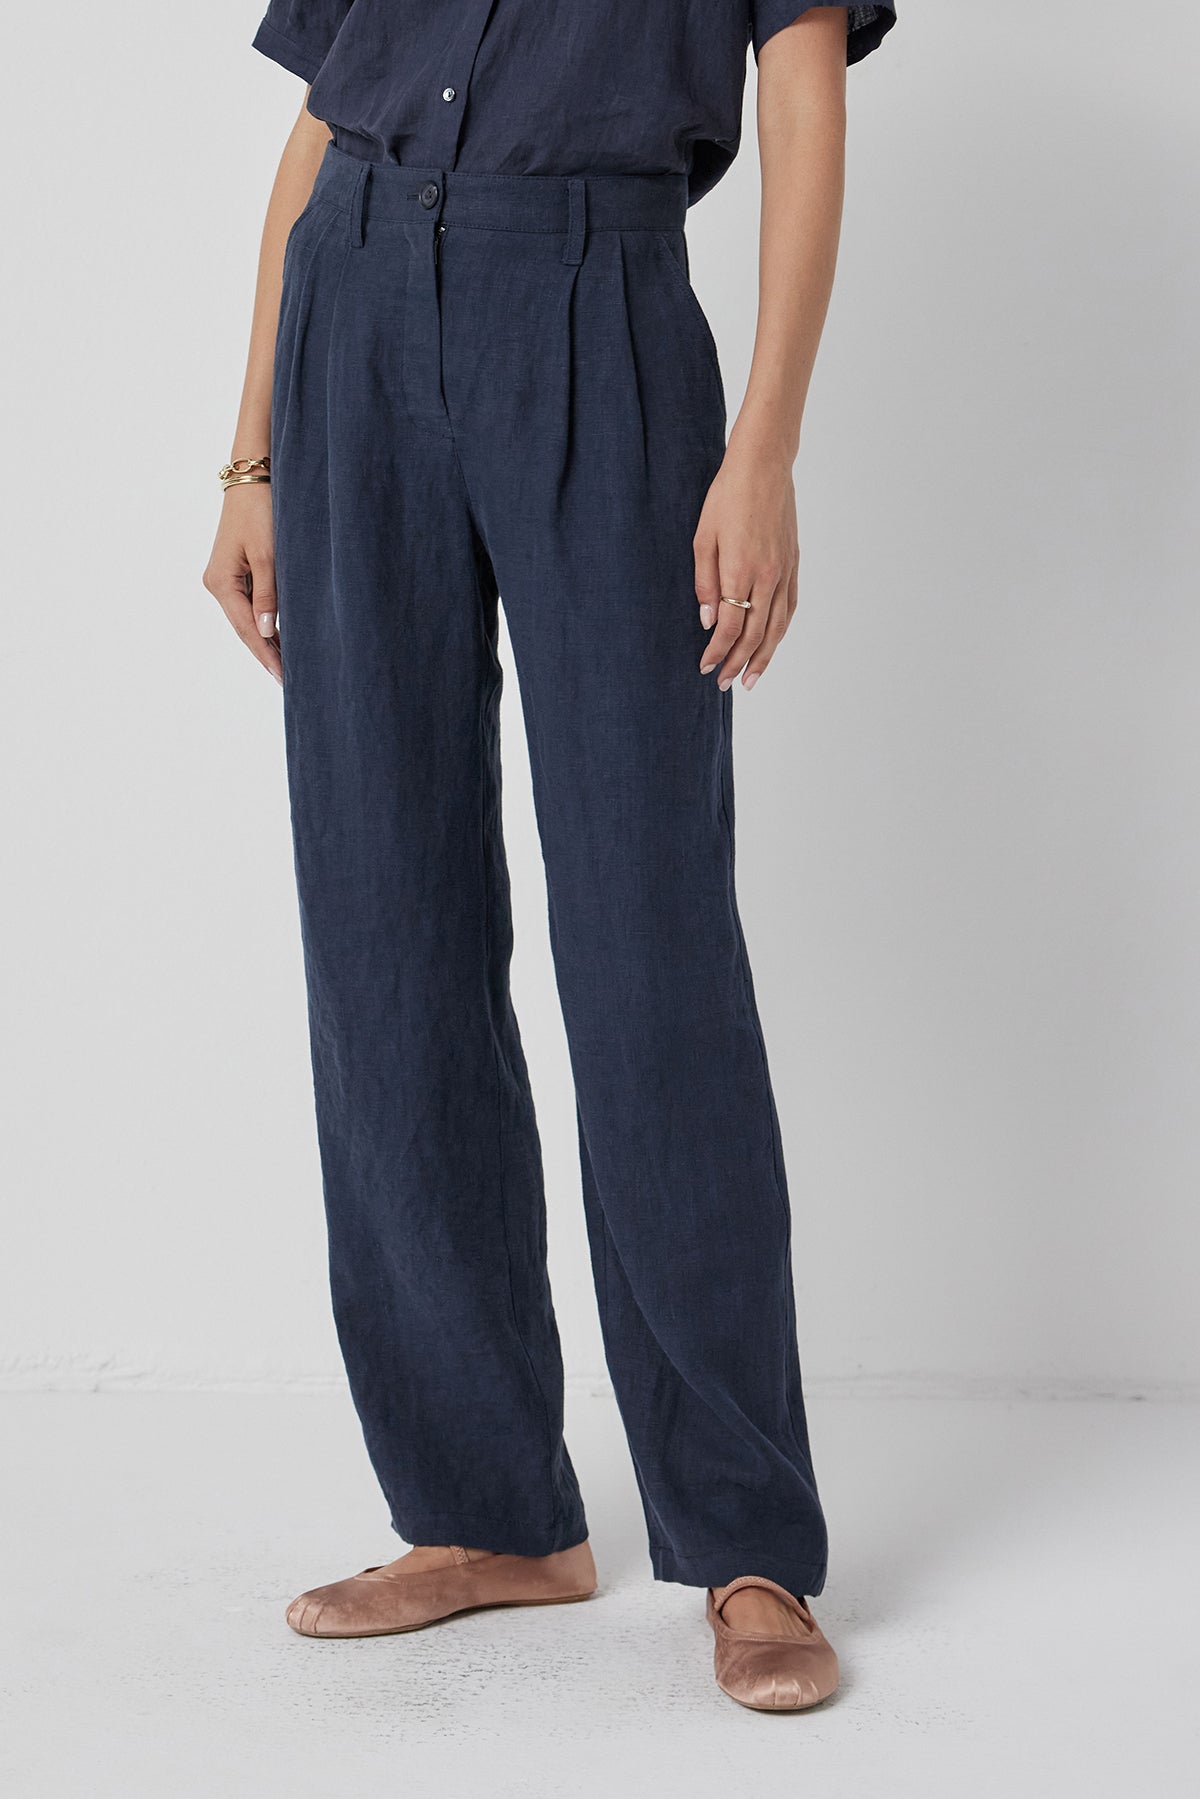 A person wearing Velvet by Jenny Graham's POMONA PANT, a heavy-weight linen, dark blue jumpsuit paired with brown shoes, standing against a white background.-36409575669953